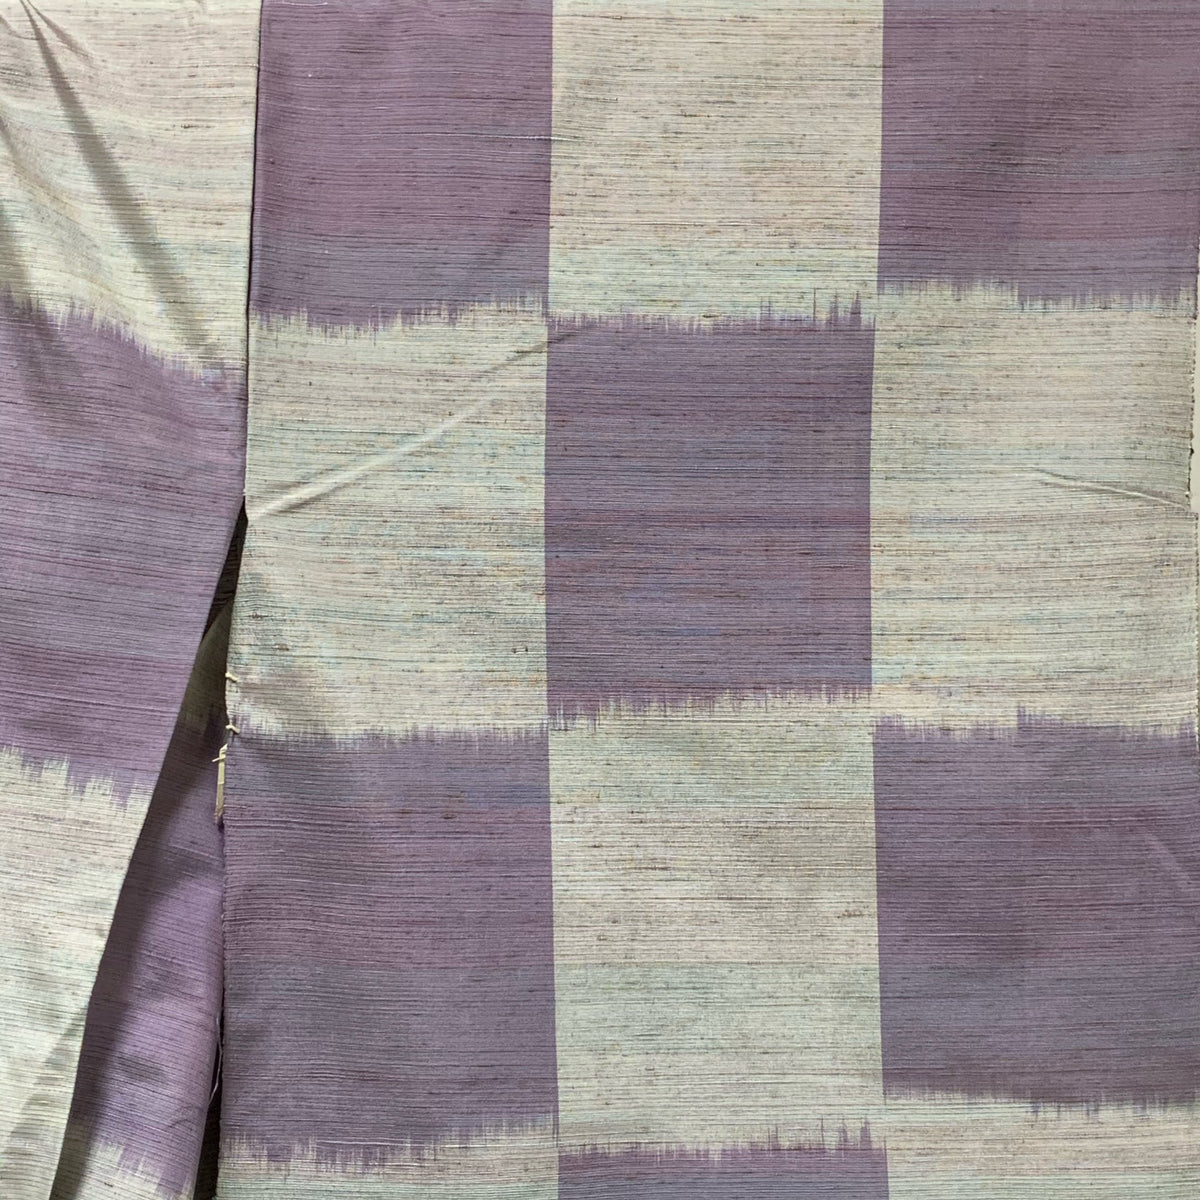 &lt;transcy&gt;Safflower
dyed Tsumugi Kimono &quot;Flower Poetry&quot; , Karieba Untailored, Pure Silk,
Yonezawa, Yamagata Prefecture, tailoring fee included&lt;/transcy&gt;